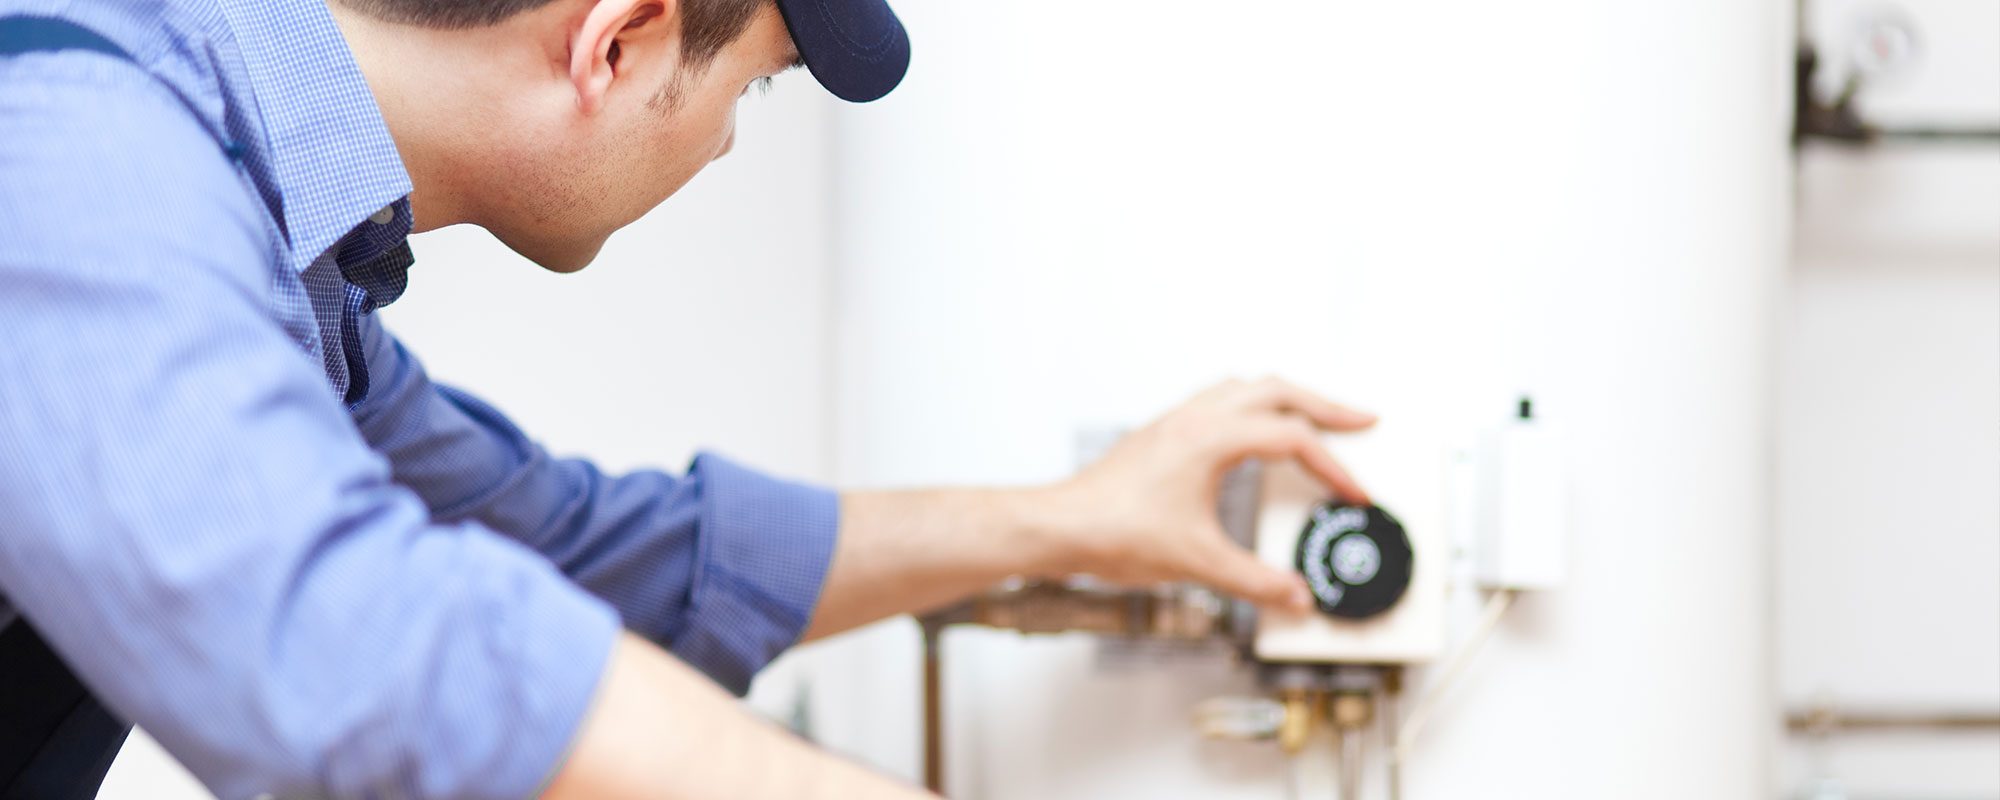 A man working on a water heater representing the water heater services by John J. Cahill servicing Chicago, IL